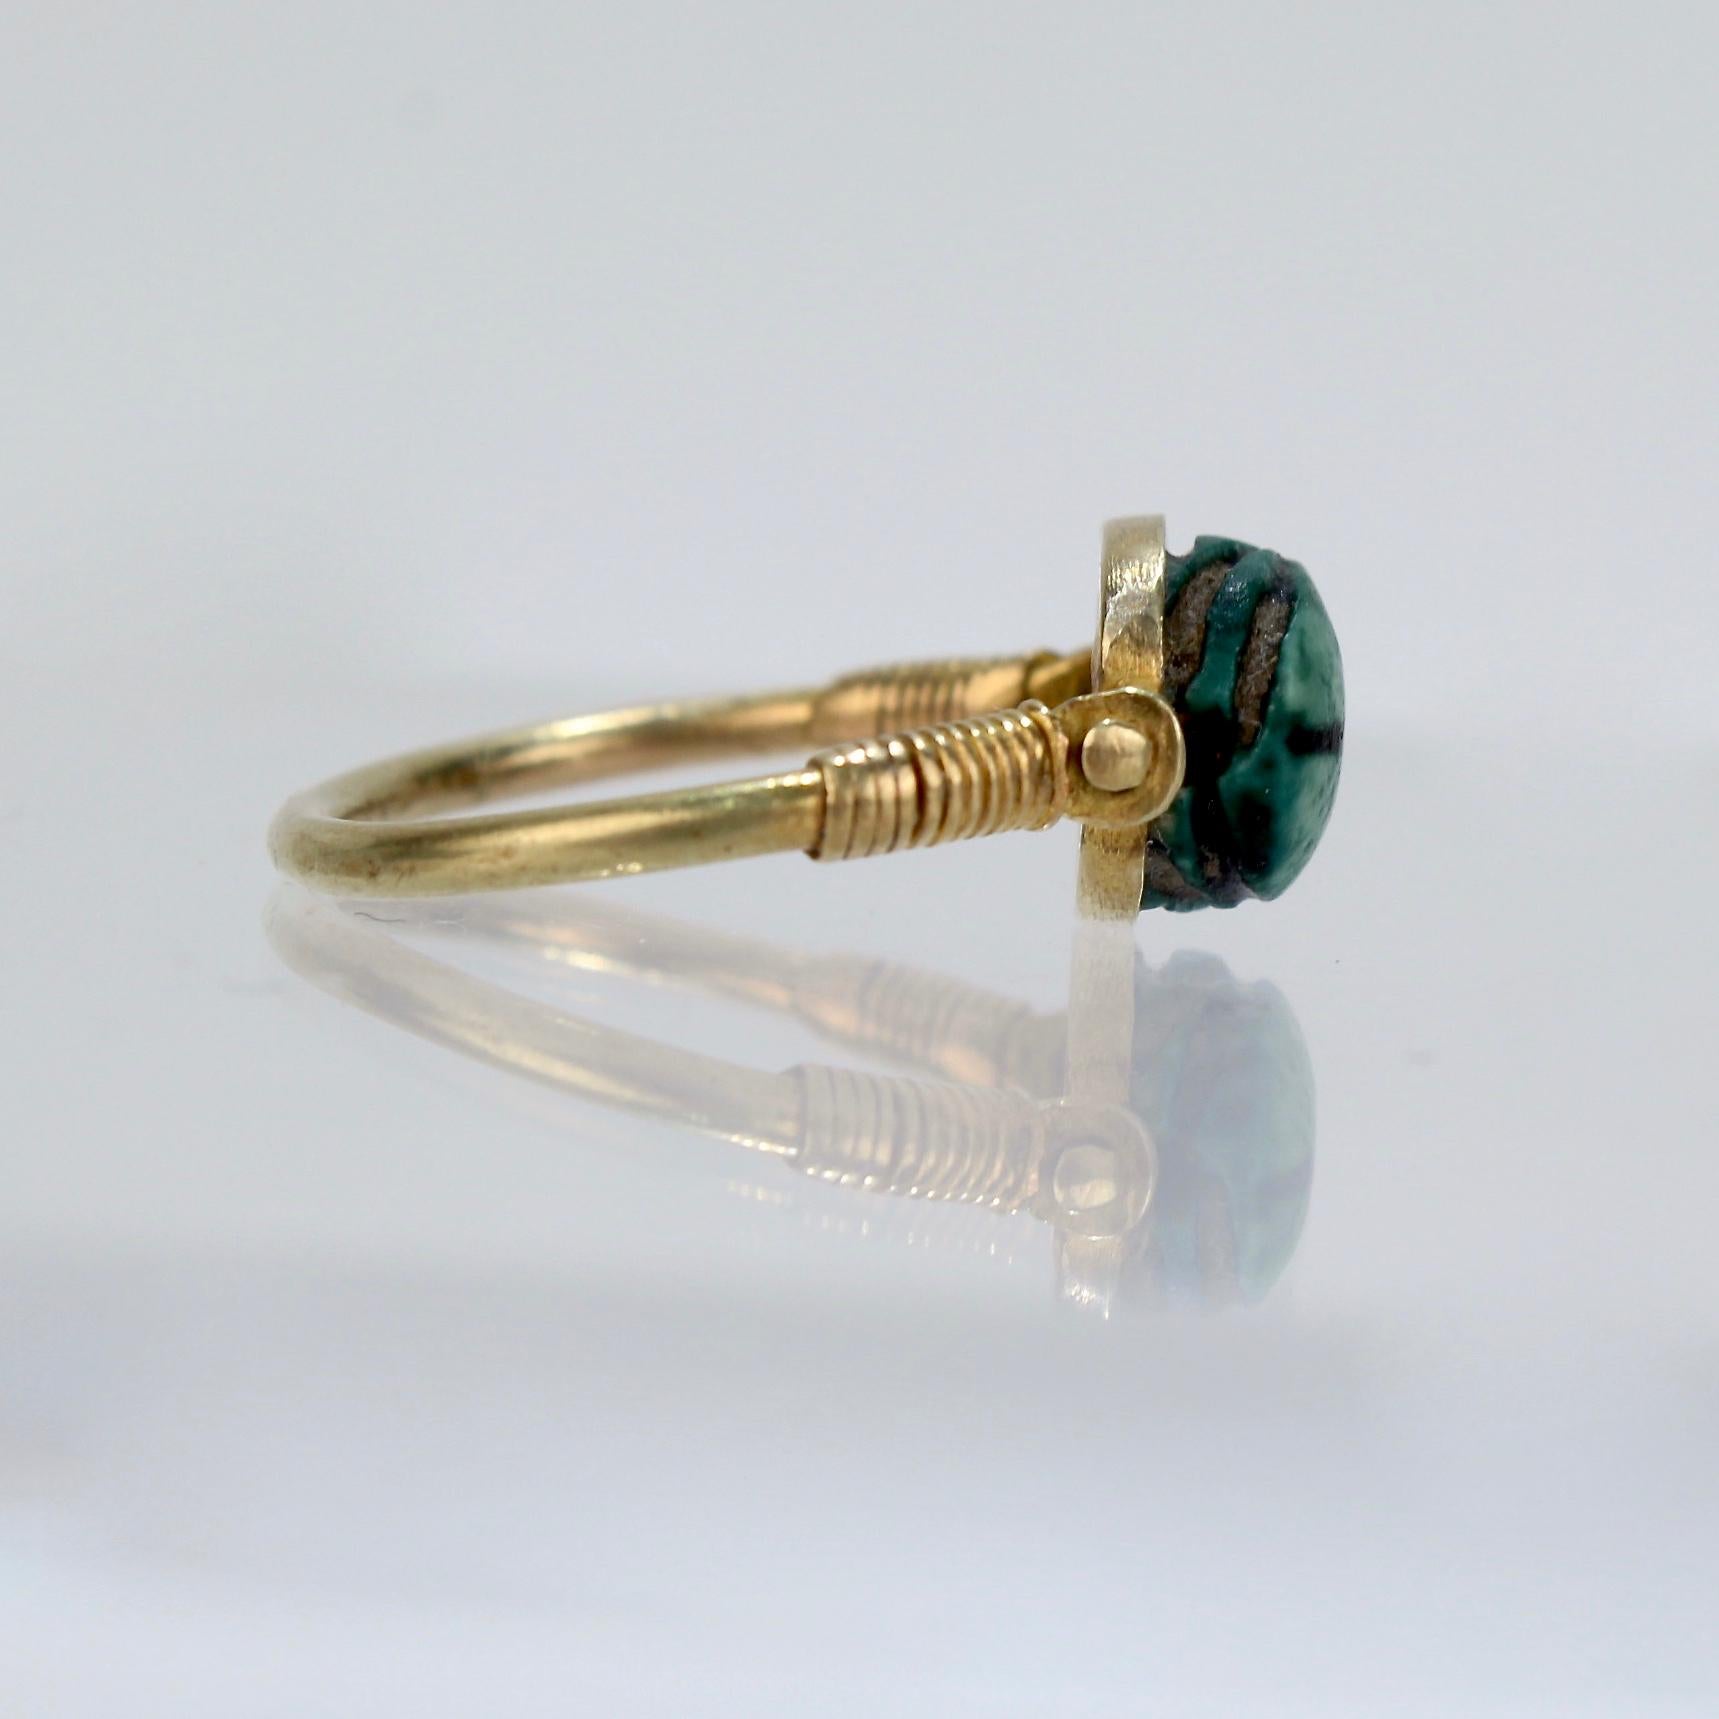 Egyptian Steatite Scarab and Gold Finger Ring with Mohasseb & Son Provenance 2